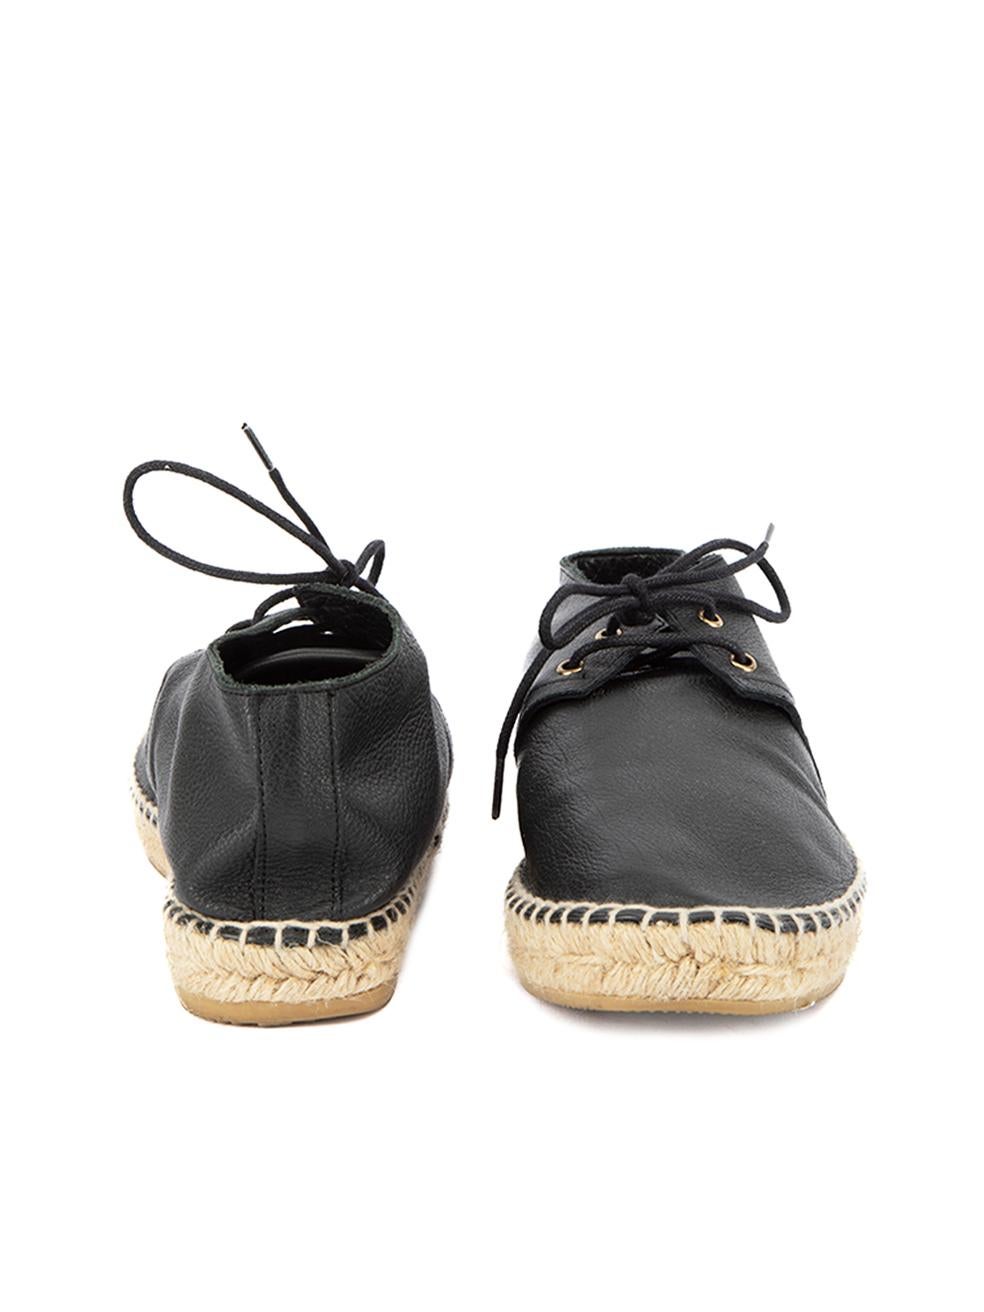 Clergerie Women's Robert Clergerie Black Leather Espadrilles In Excellent Condition For Sale In London, GB